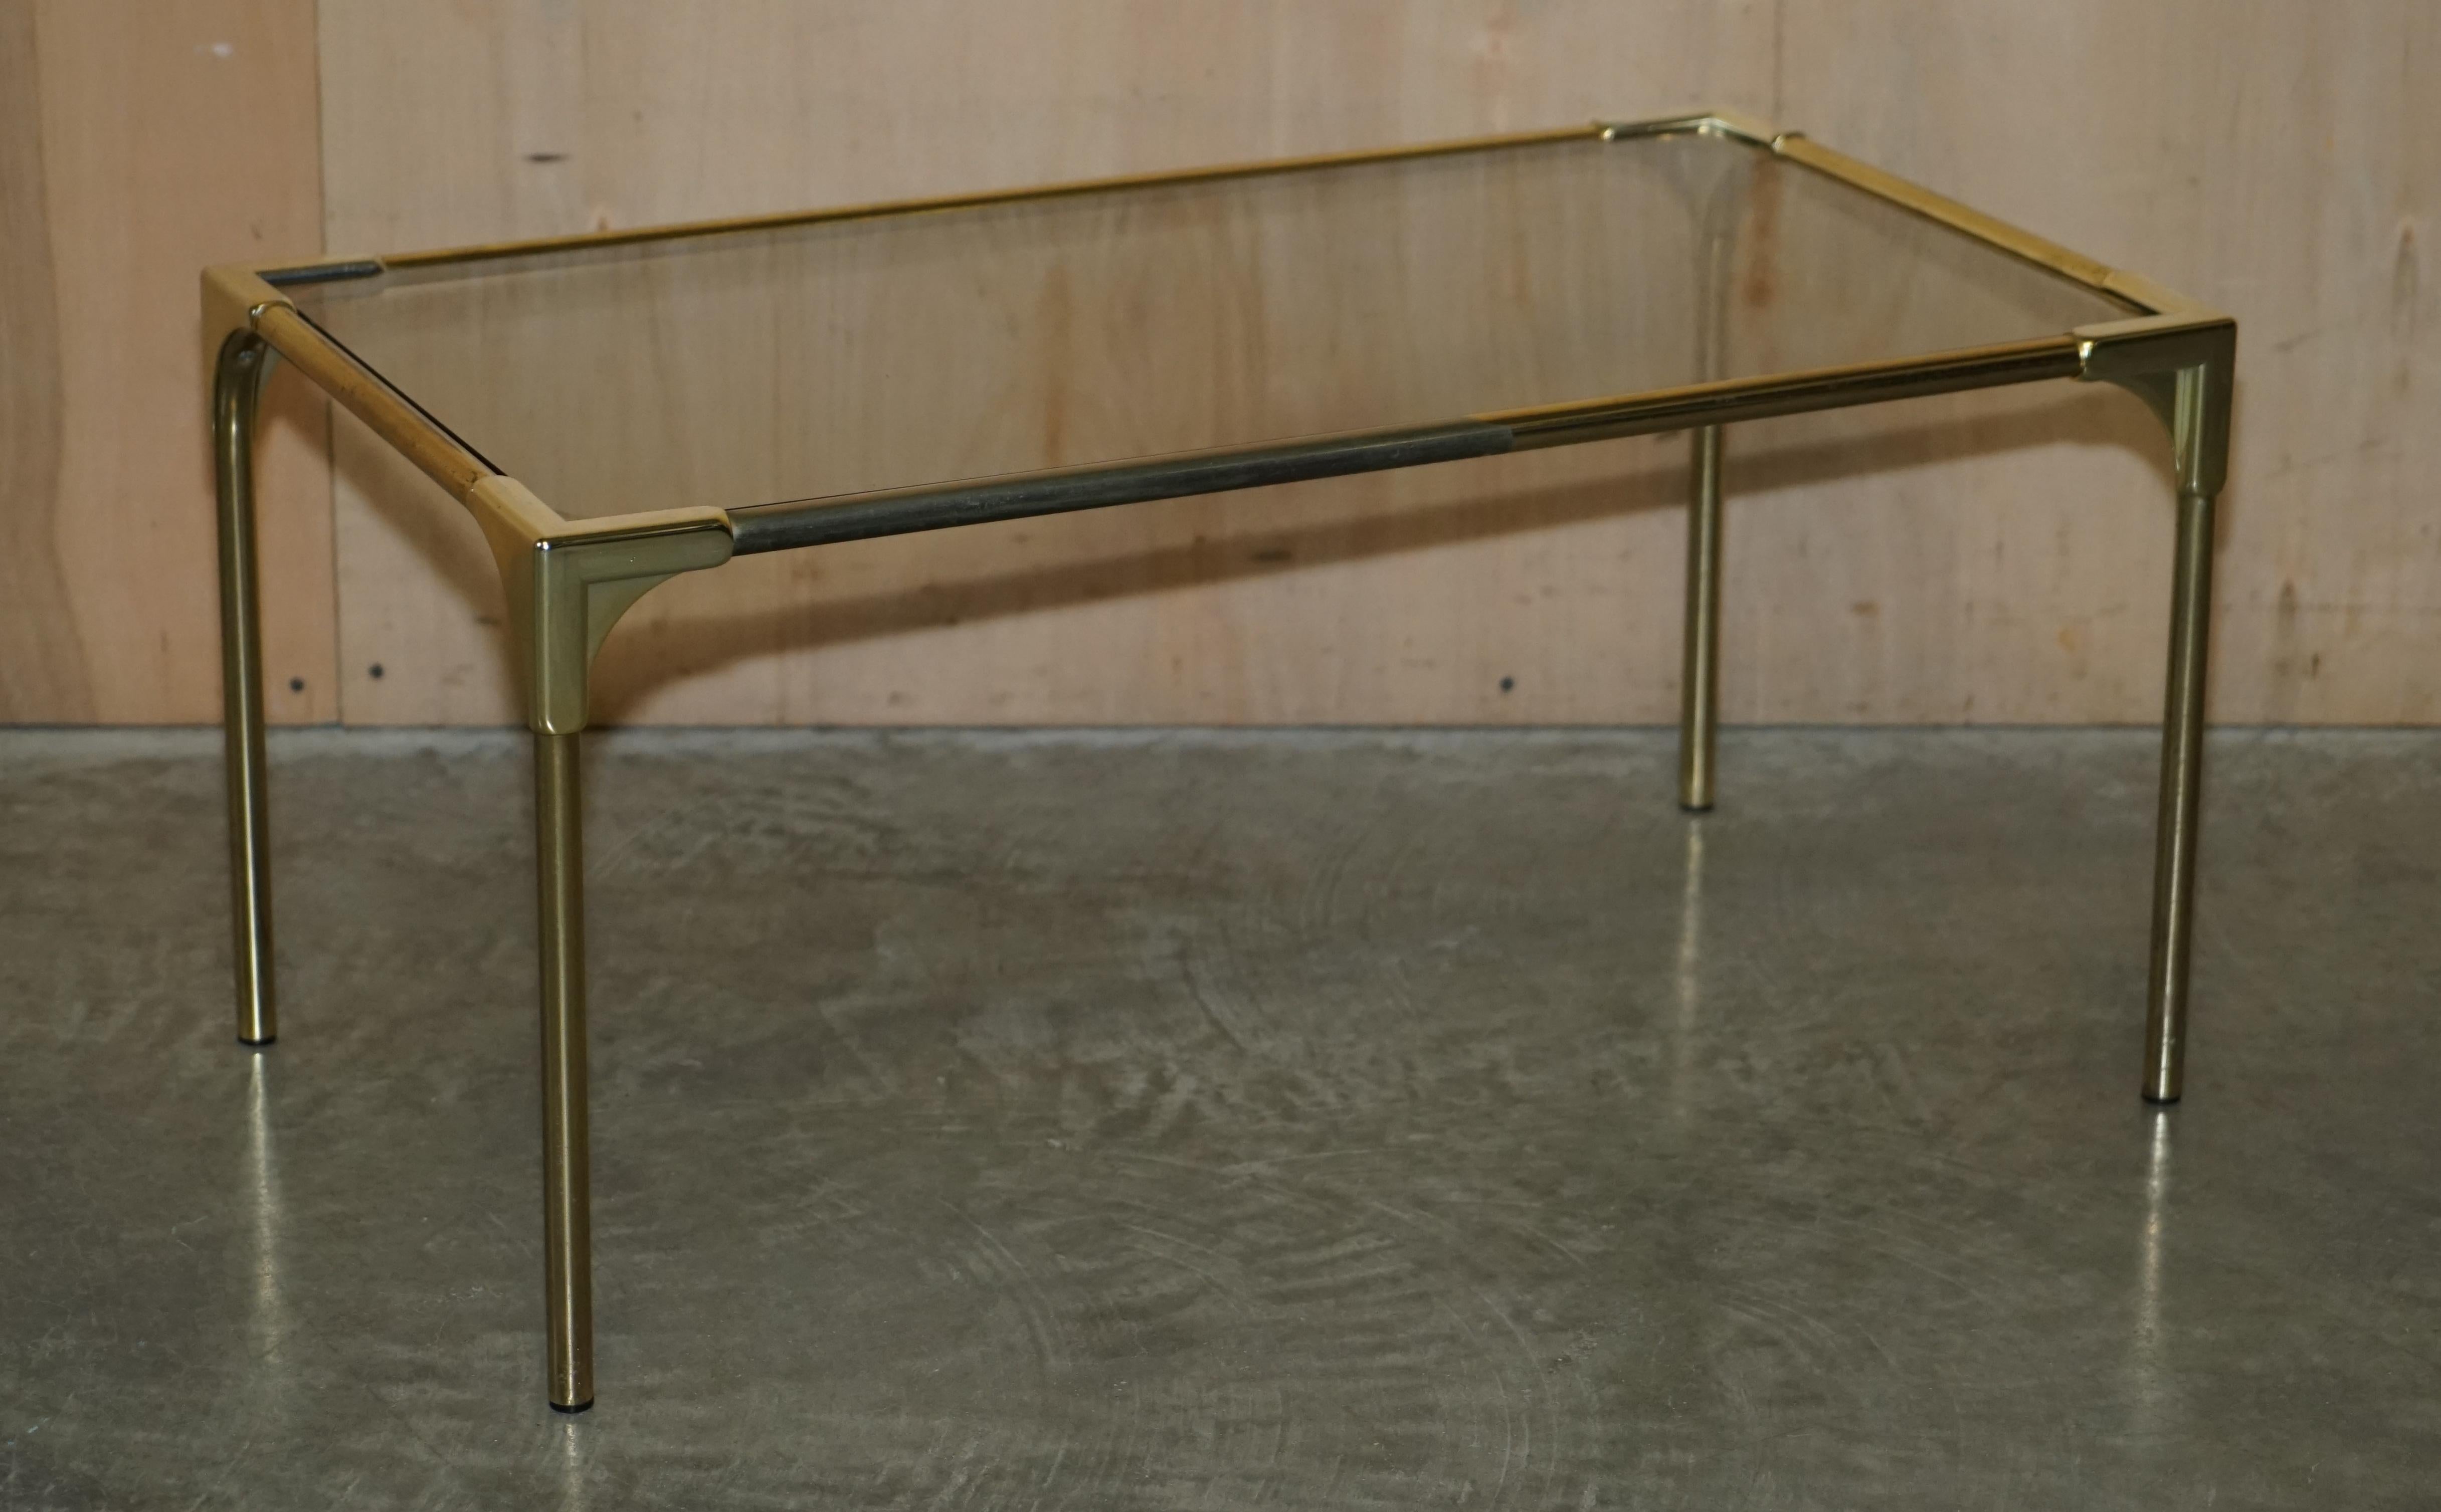 We are delighted to offer for sale this lovely suite of original circa 1960s Mid-Century Modern French Empire brass and smoked glass tables

This set of tables is very much on trend and will never be far from it, the lines are elegant and timeless